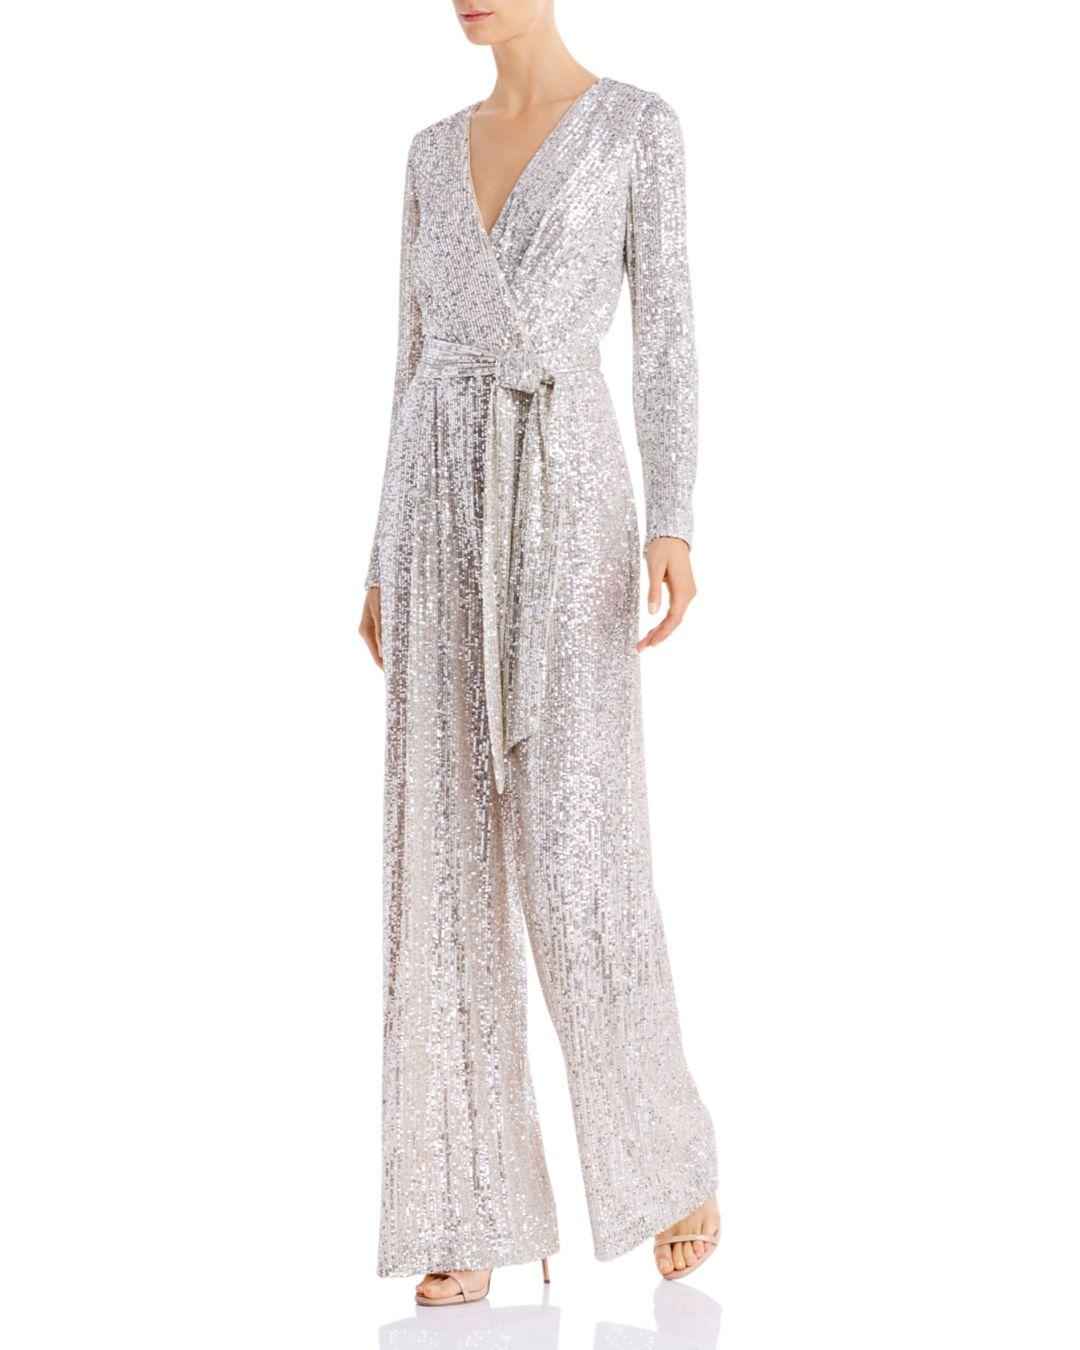 Eliza J Synthetic Sequined Faux - Wrap Jumpsuit in Silver (Metallic) - Lyst